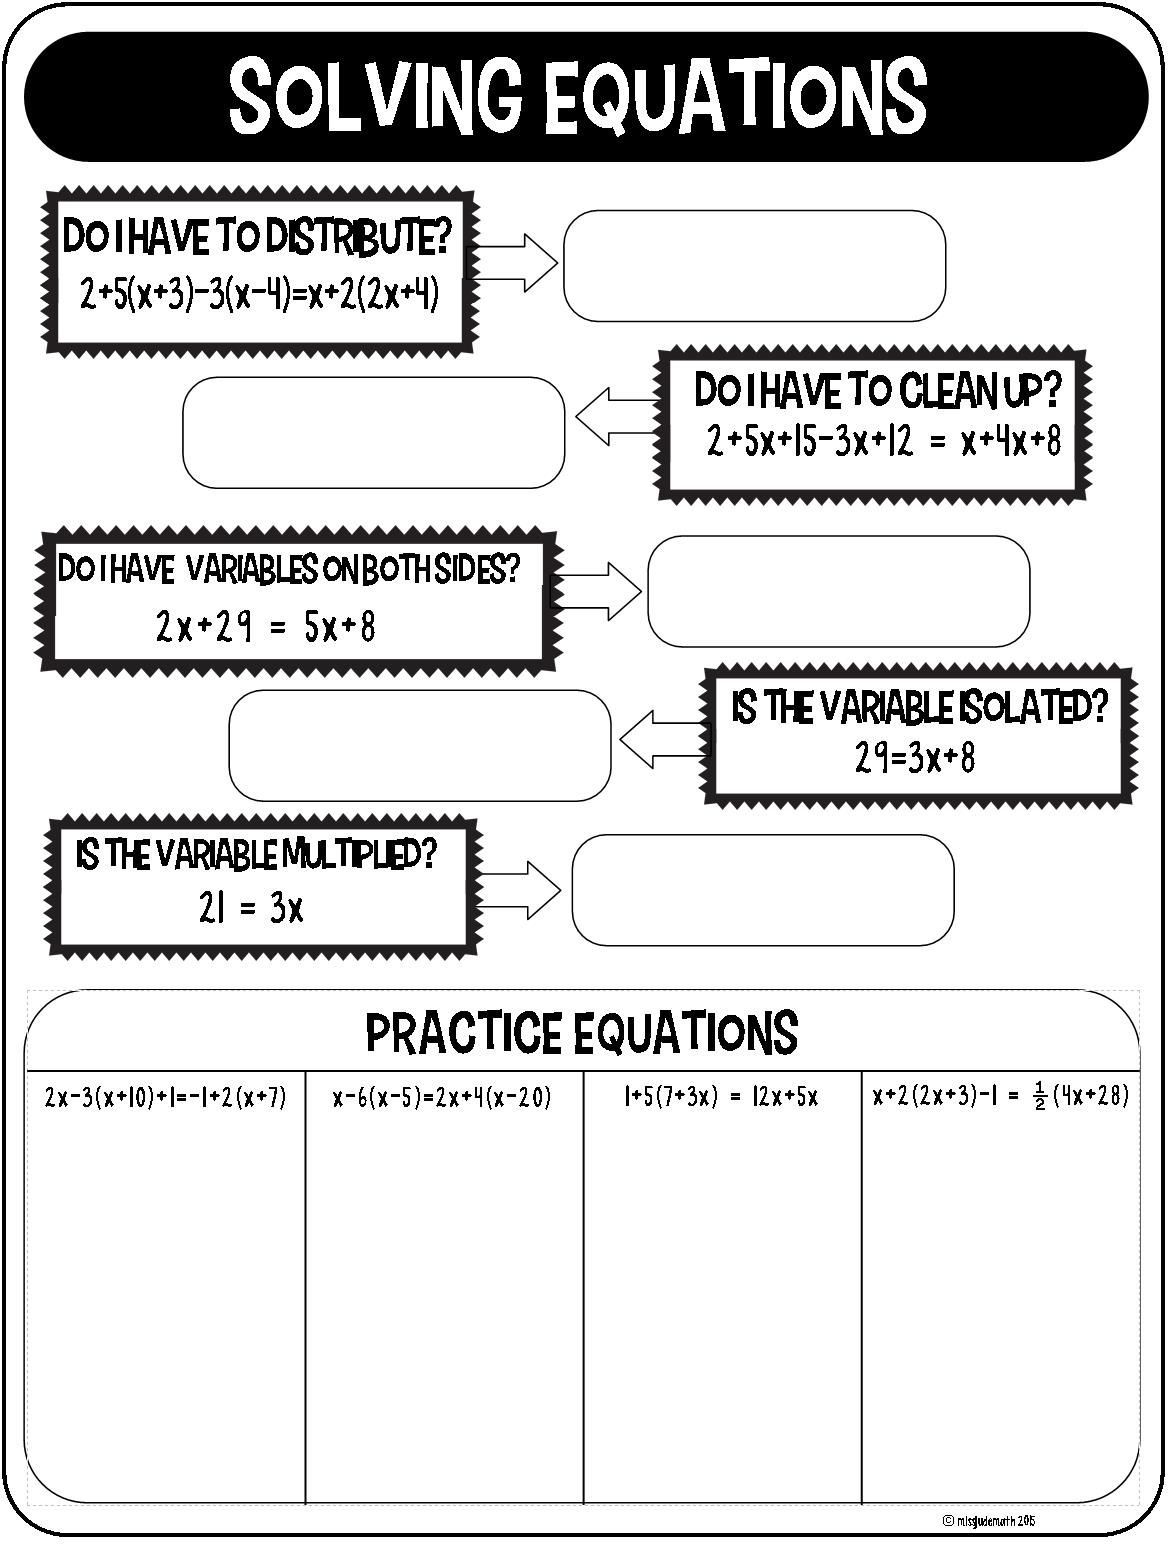 How to solve an equation graphic organizer for interactive notebooks or classroom poster from the miss jude math! TPT shop